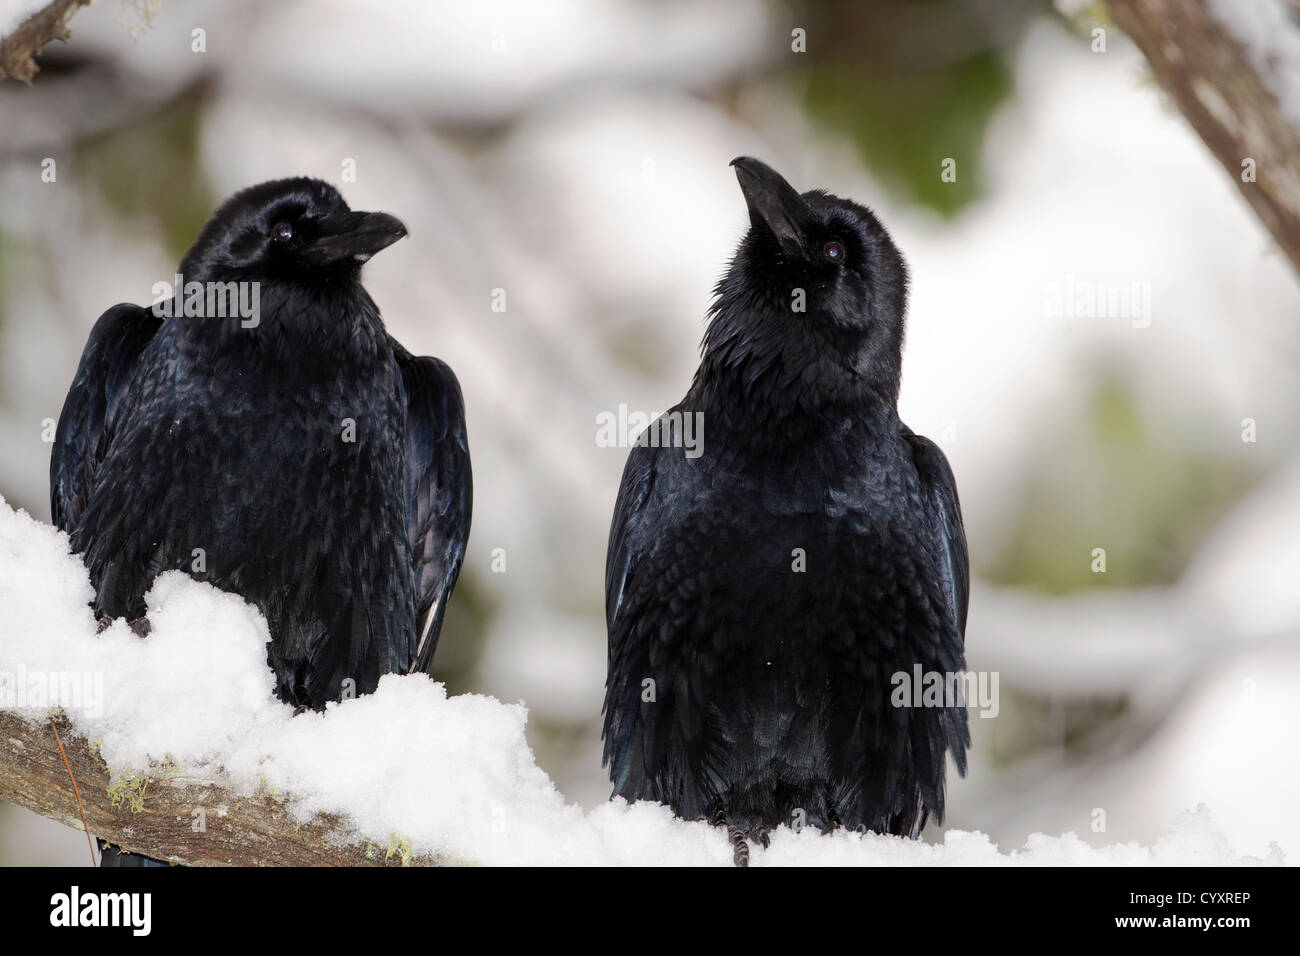 A pair of Ravens sit on a snowy branch in Yosemite National Park, California. Stock Photo